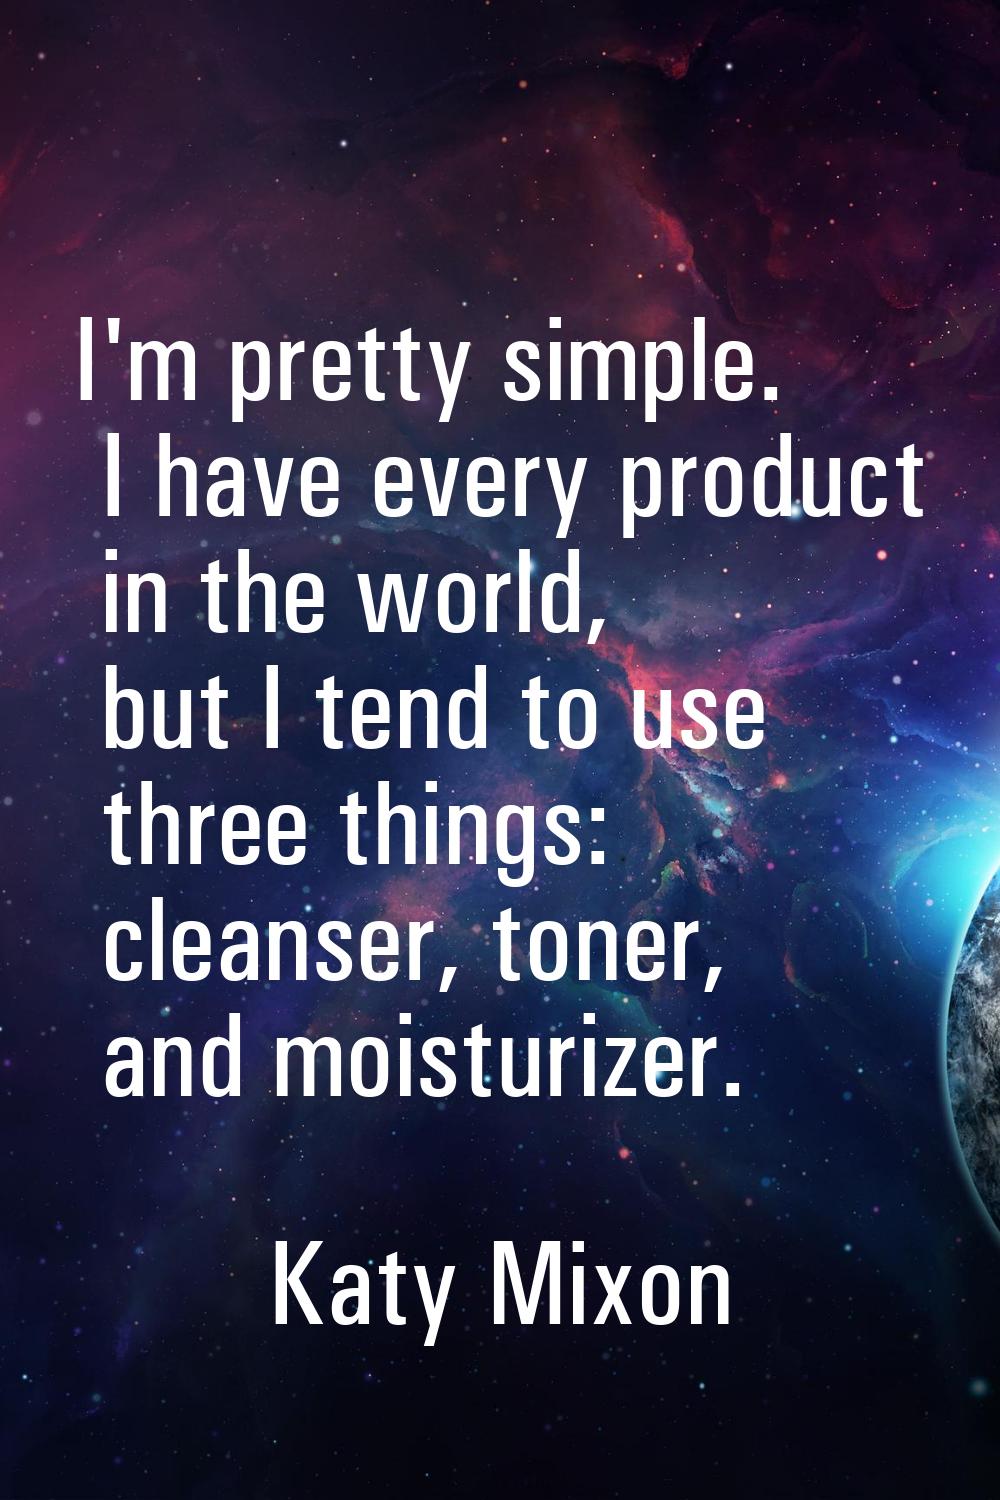 I'm pretty simple. I have every product in the world, but I tend to use three things: cleanser, ton